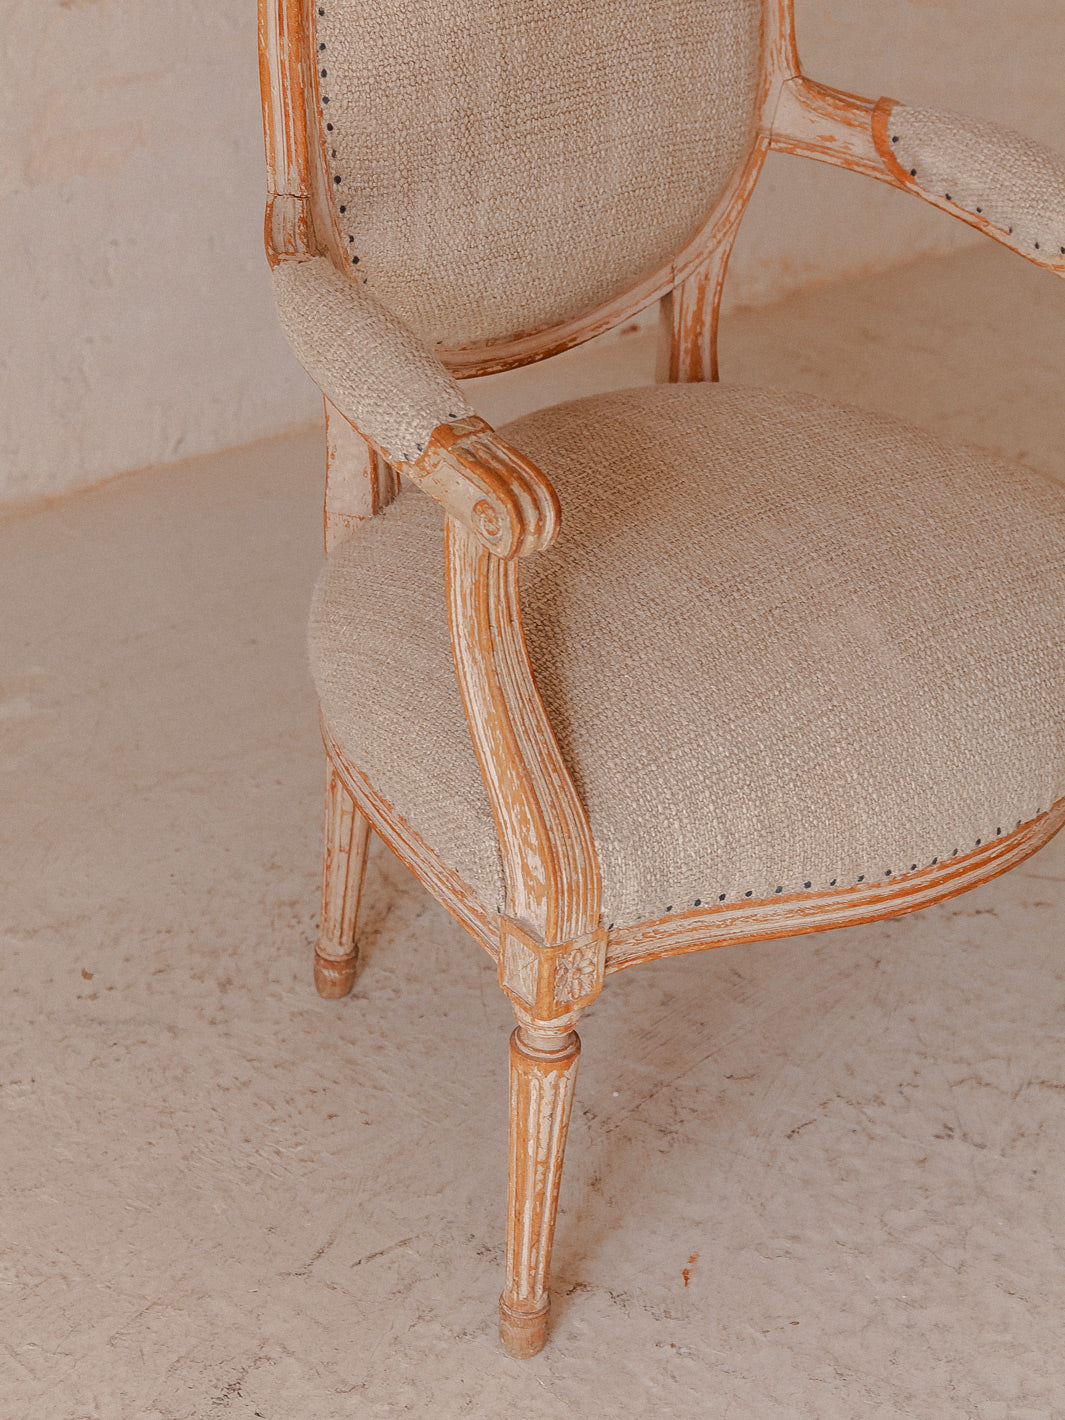 Pair of Gustavian armchairs from the 19th century